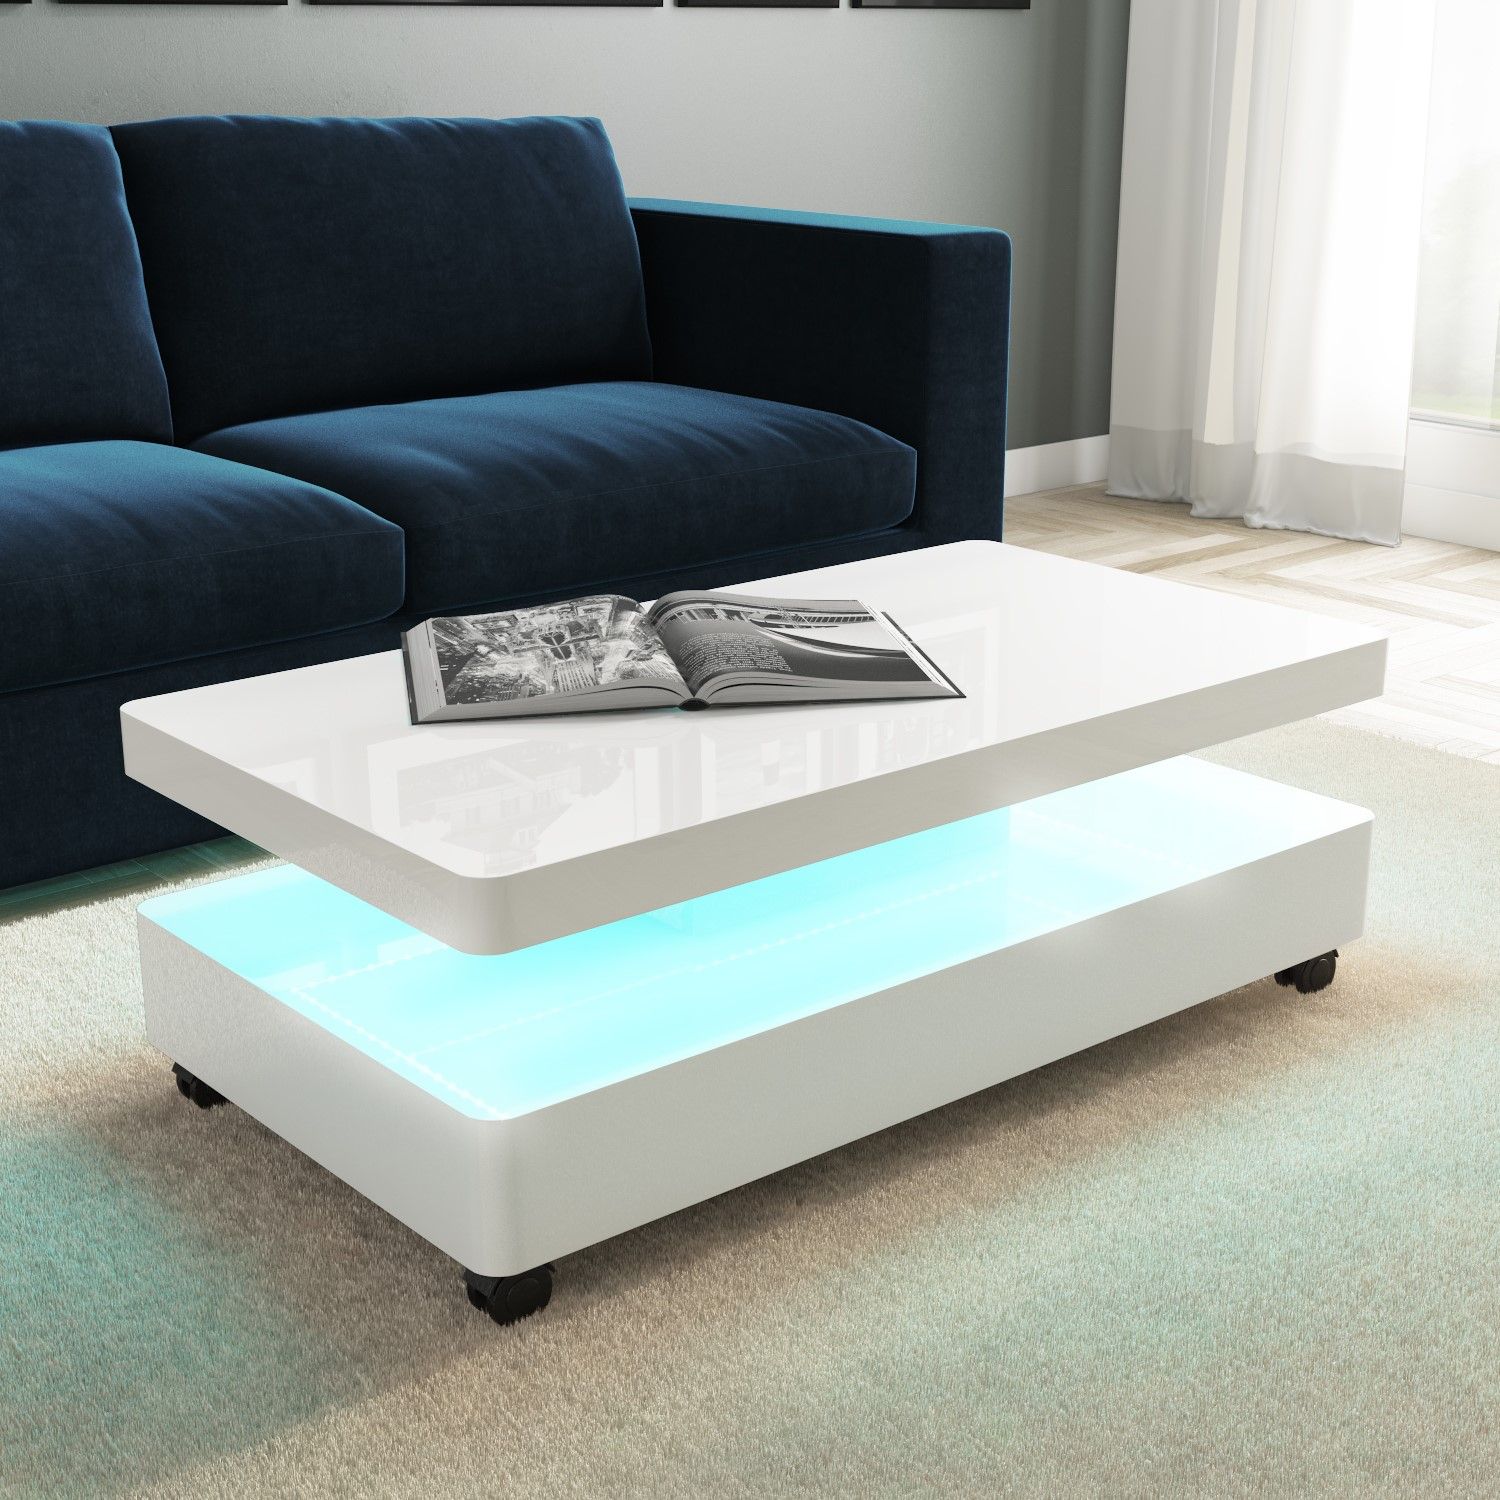 High Gloss White Coffee Table With Led Lighting 5060388562168 | Ebay With Regard To Coffee Tables With Led Lights (View 4 of 20)